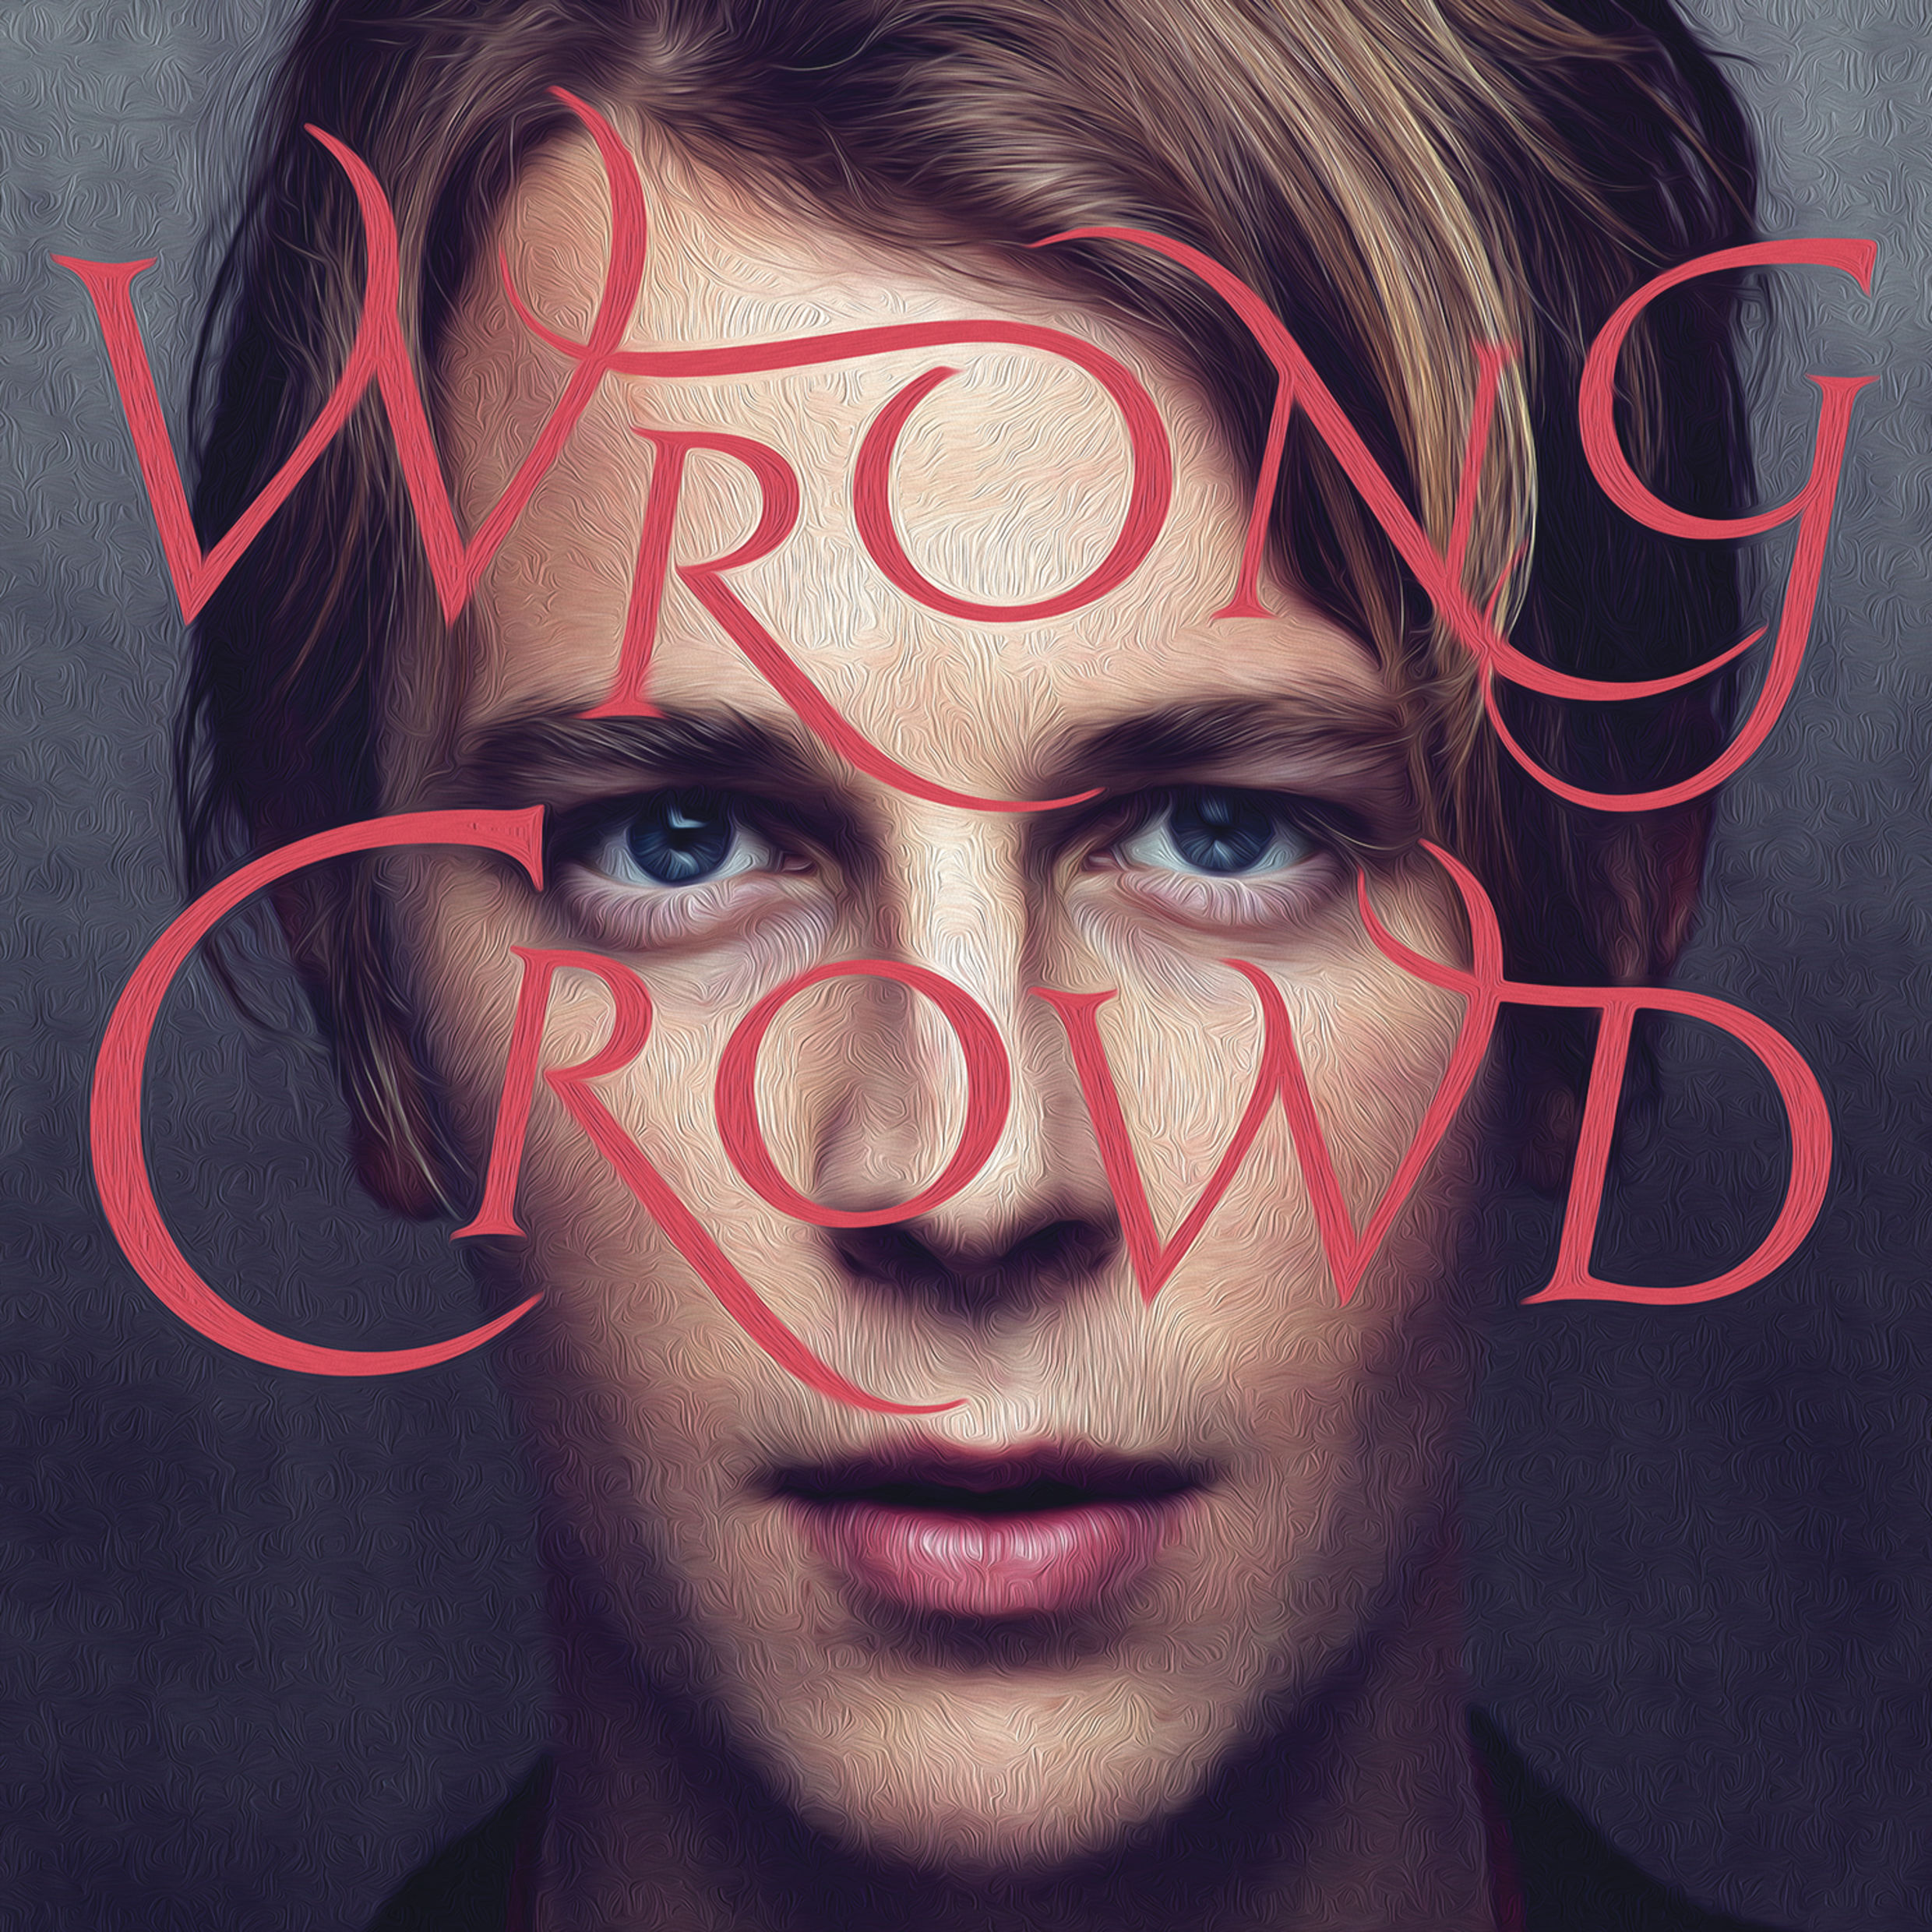 Tom-Odell-Wrong-Crowd-2016-2480x2480